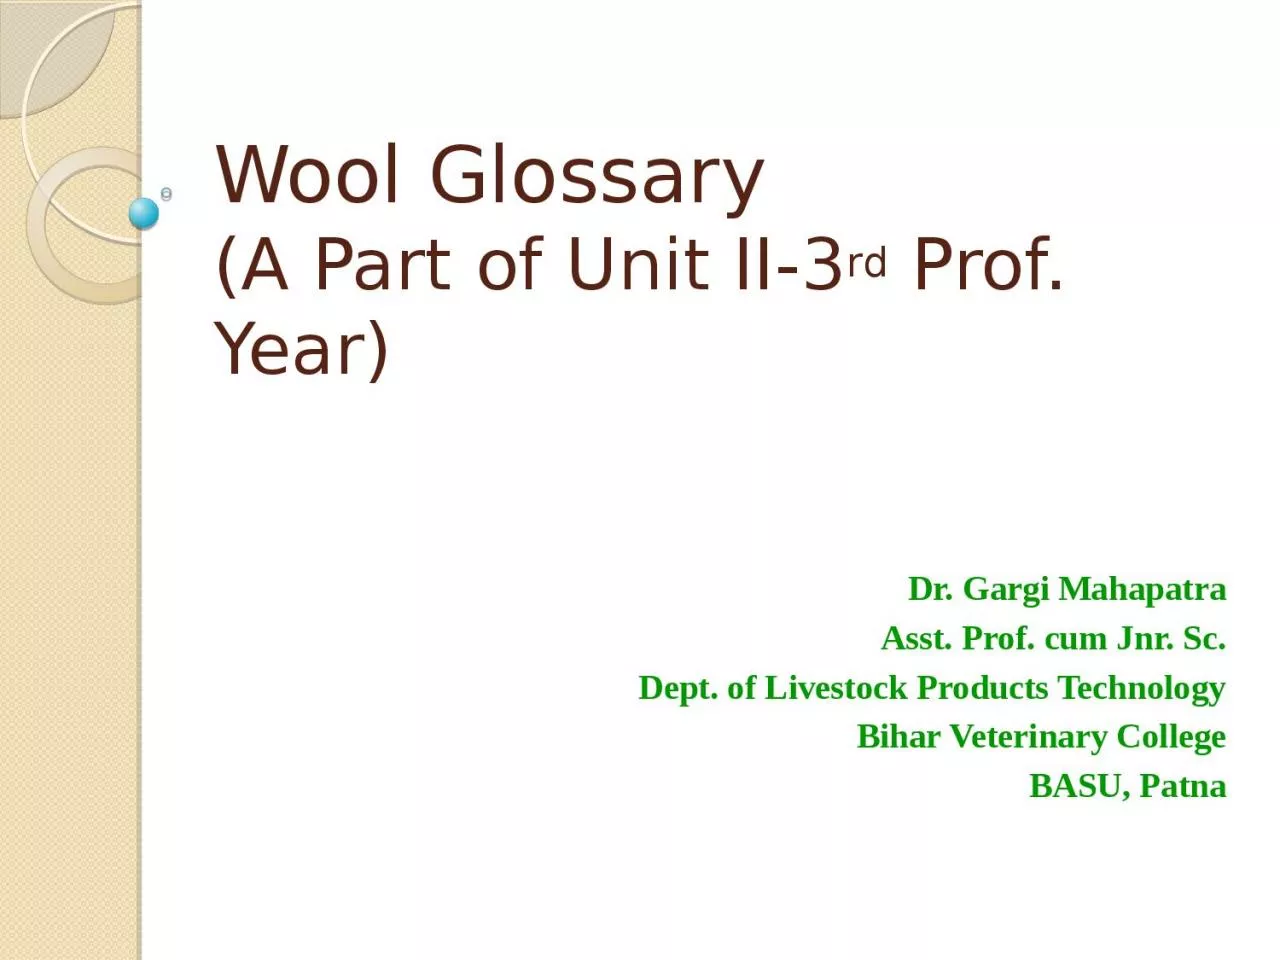 Wool Glossary (A Part of Unit II-